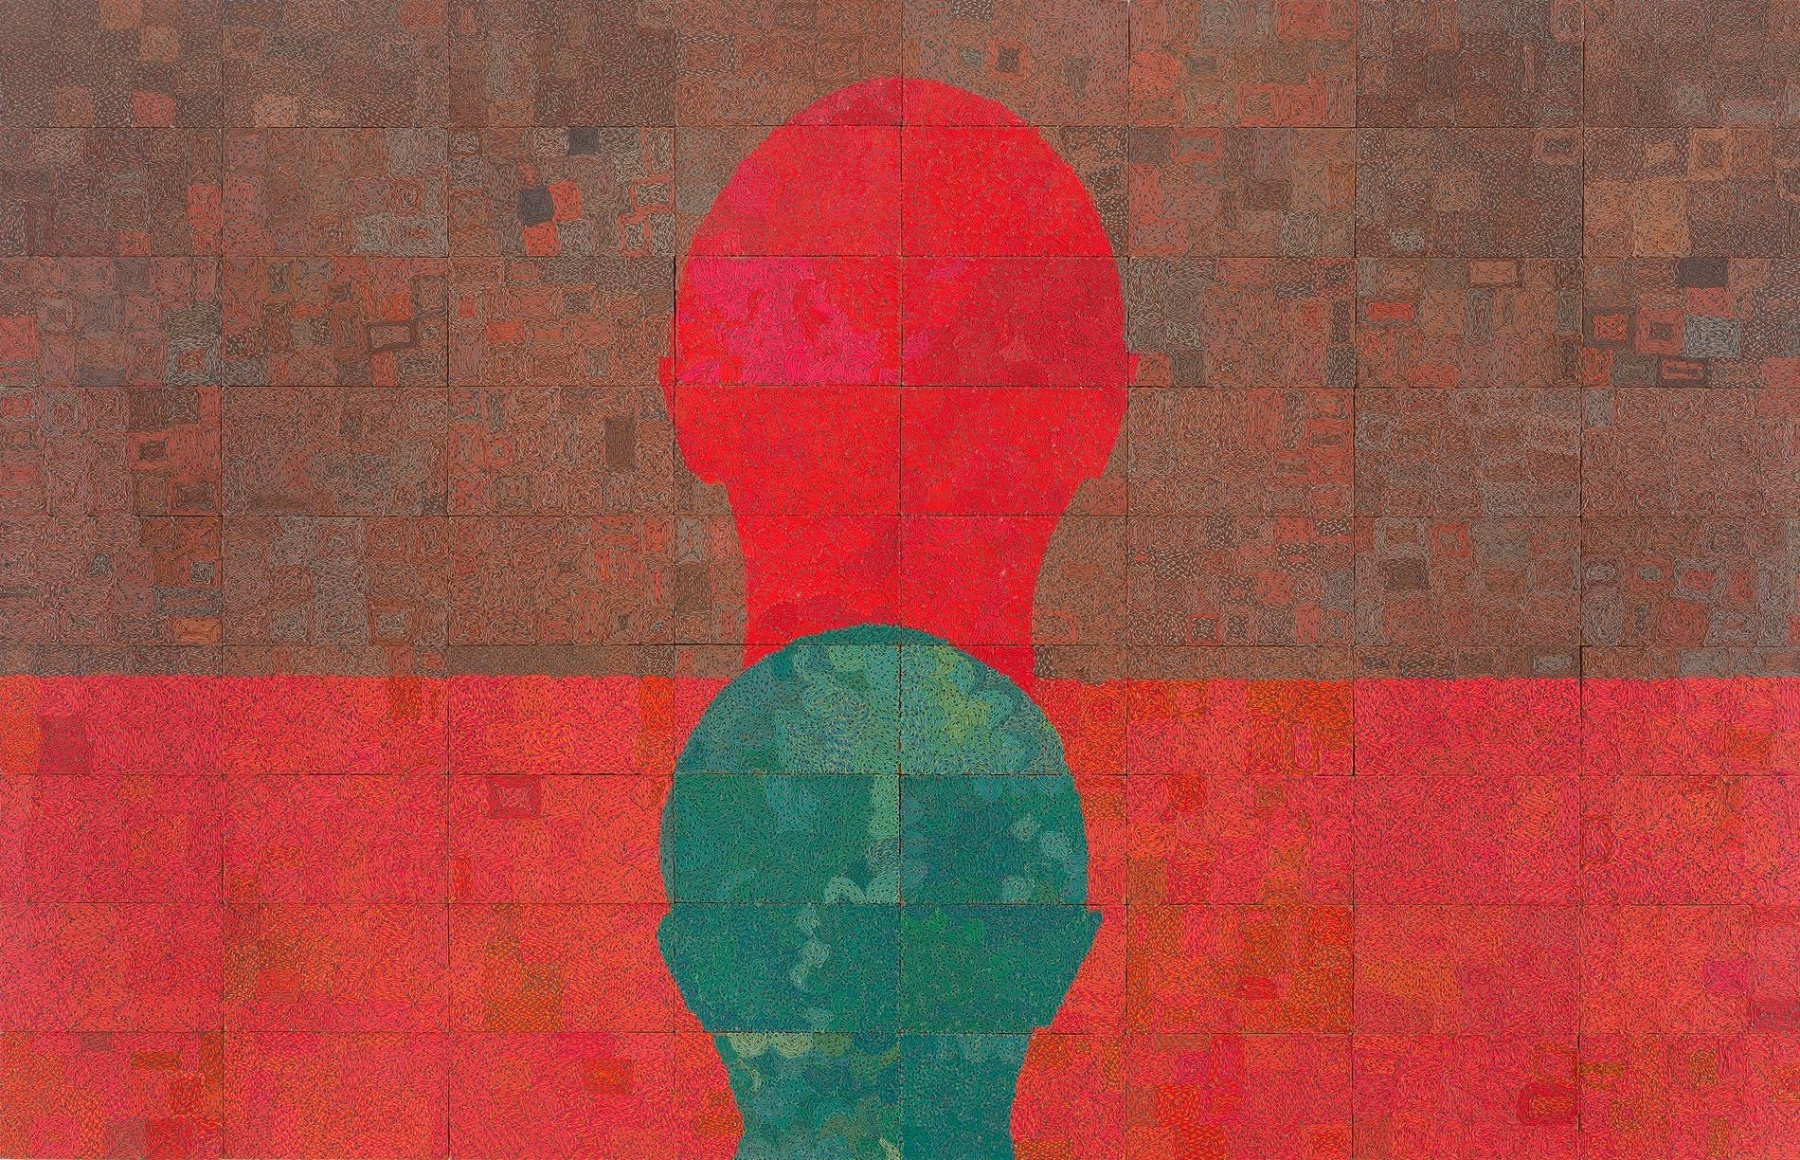 silhouette of a human head duplicated in red and green